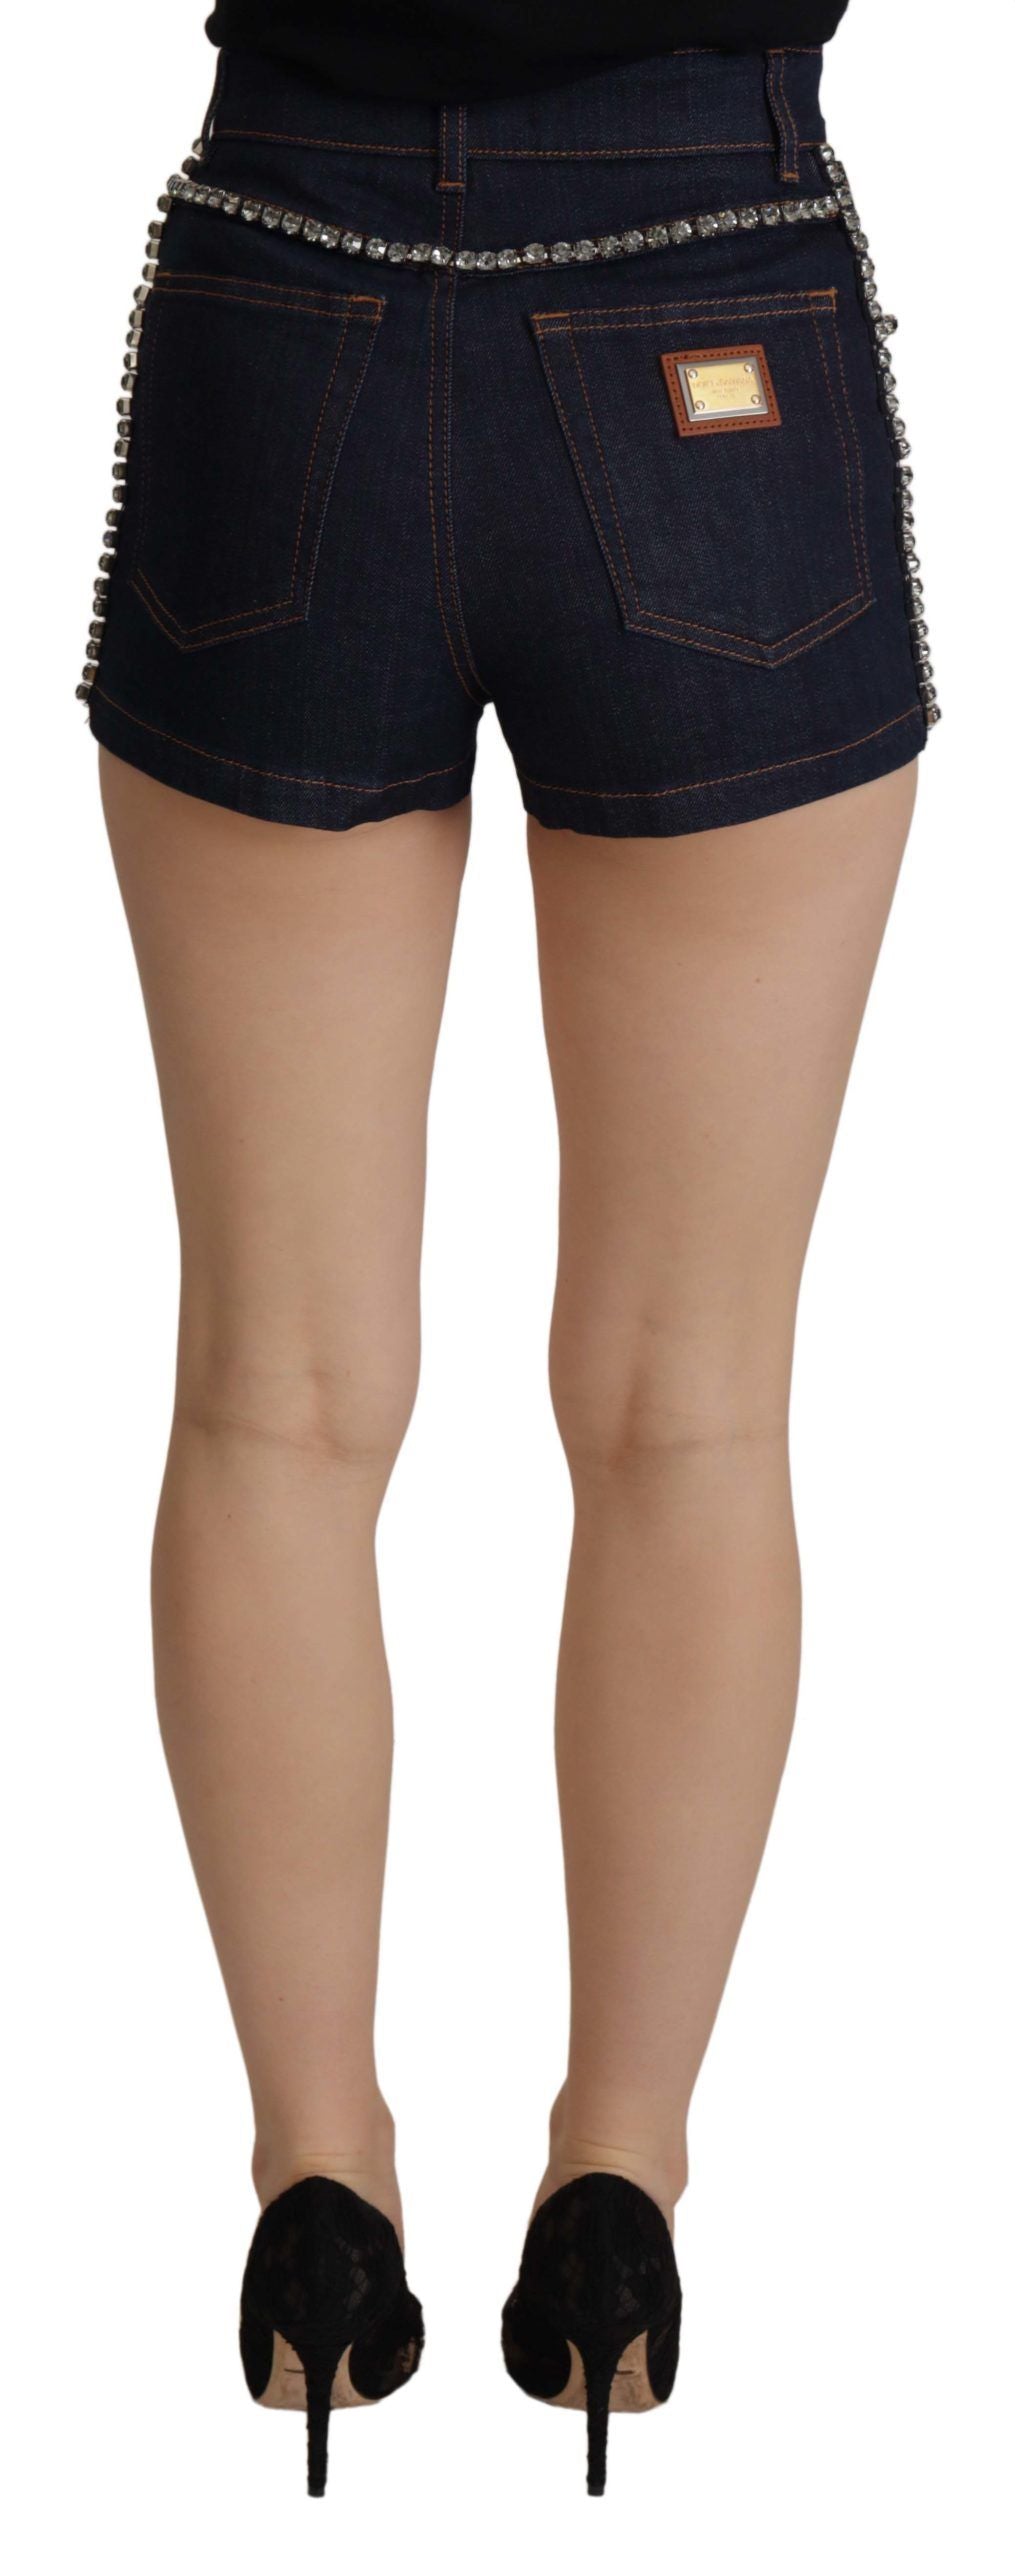 Chic High Waist Hot Pants Shorts with Crystal Detailing